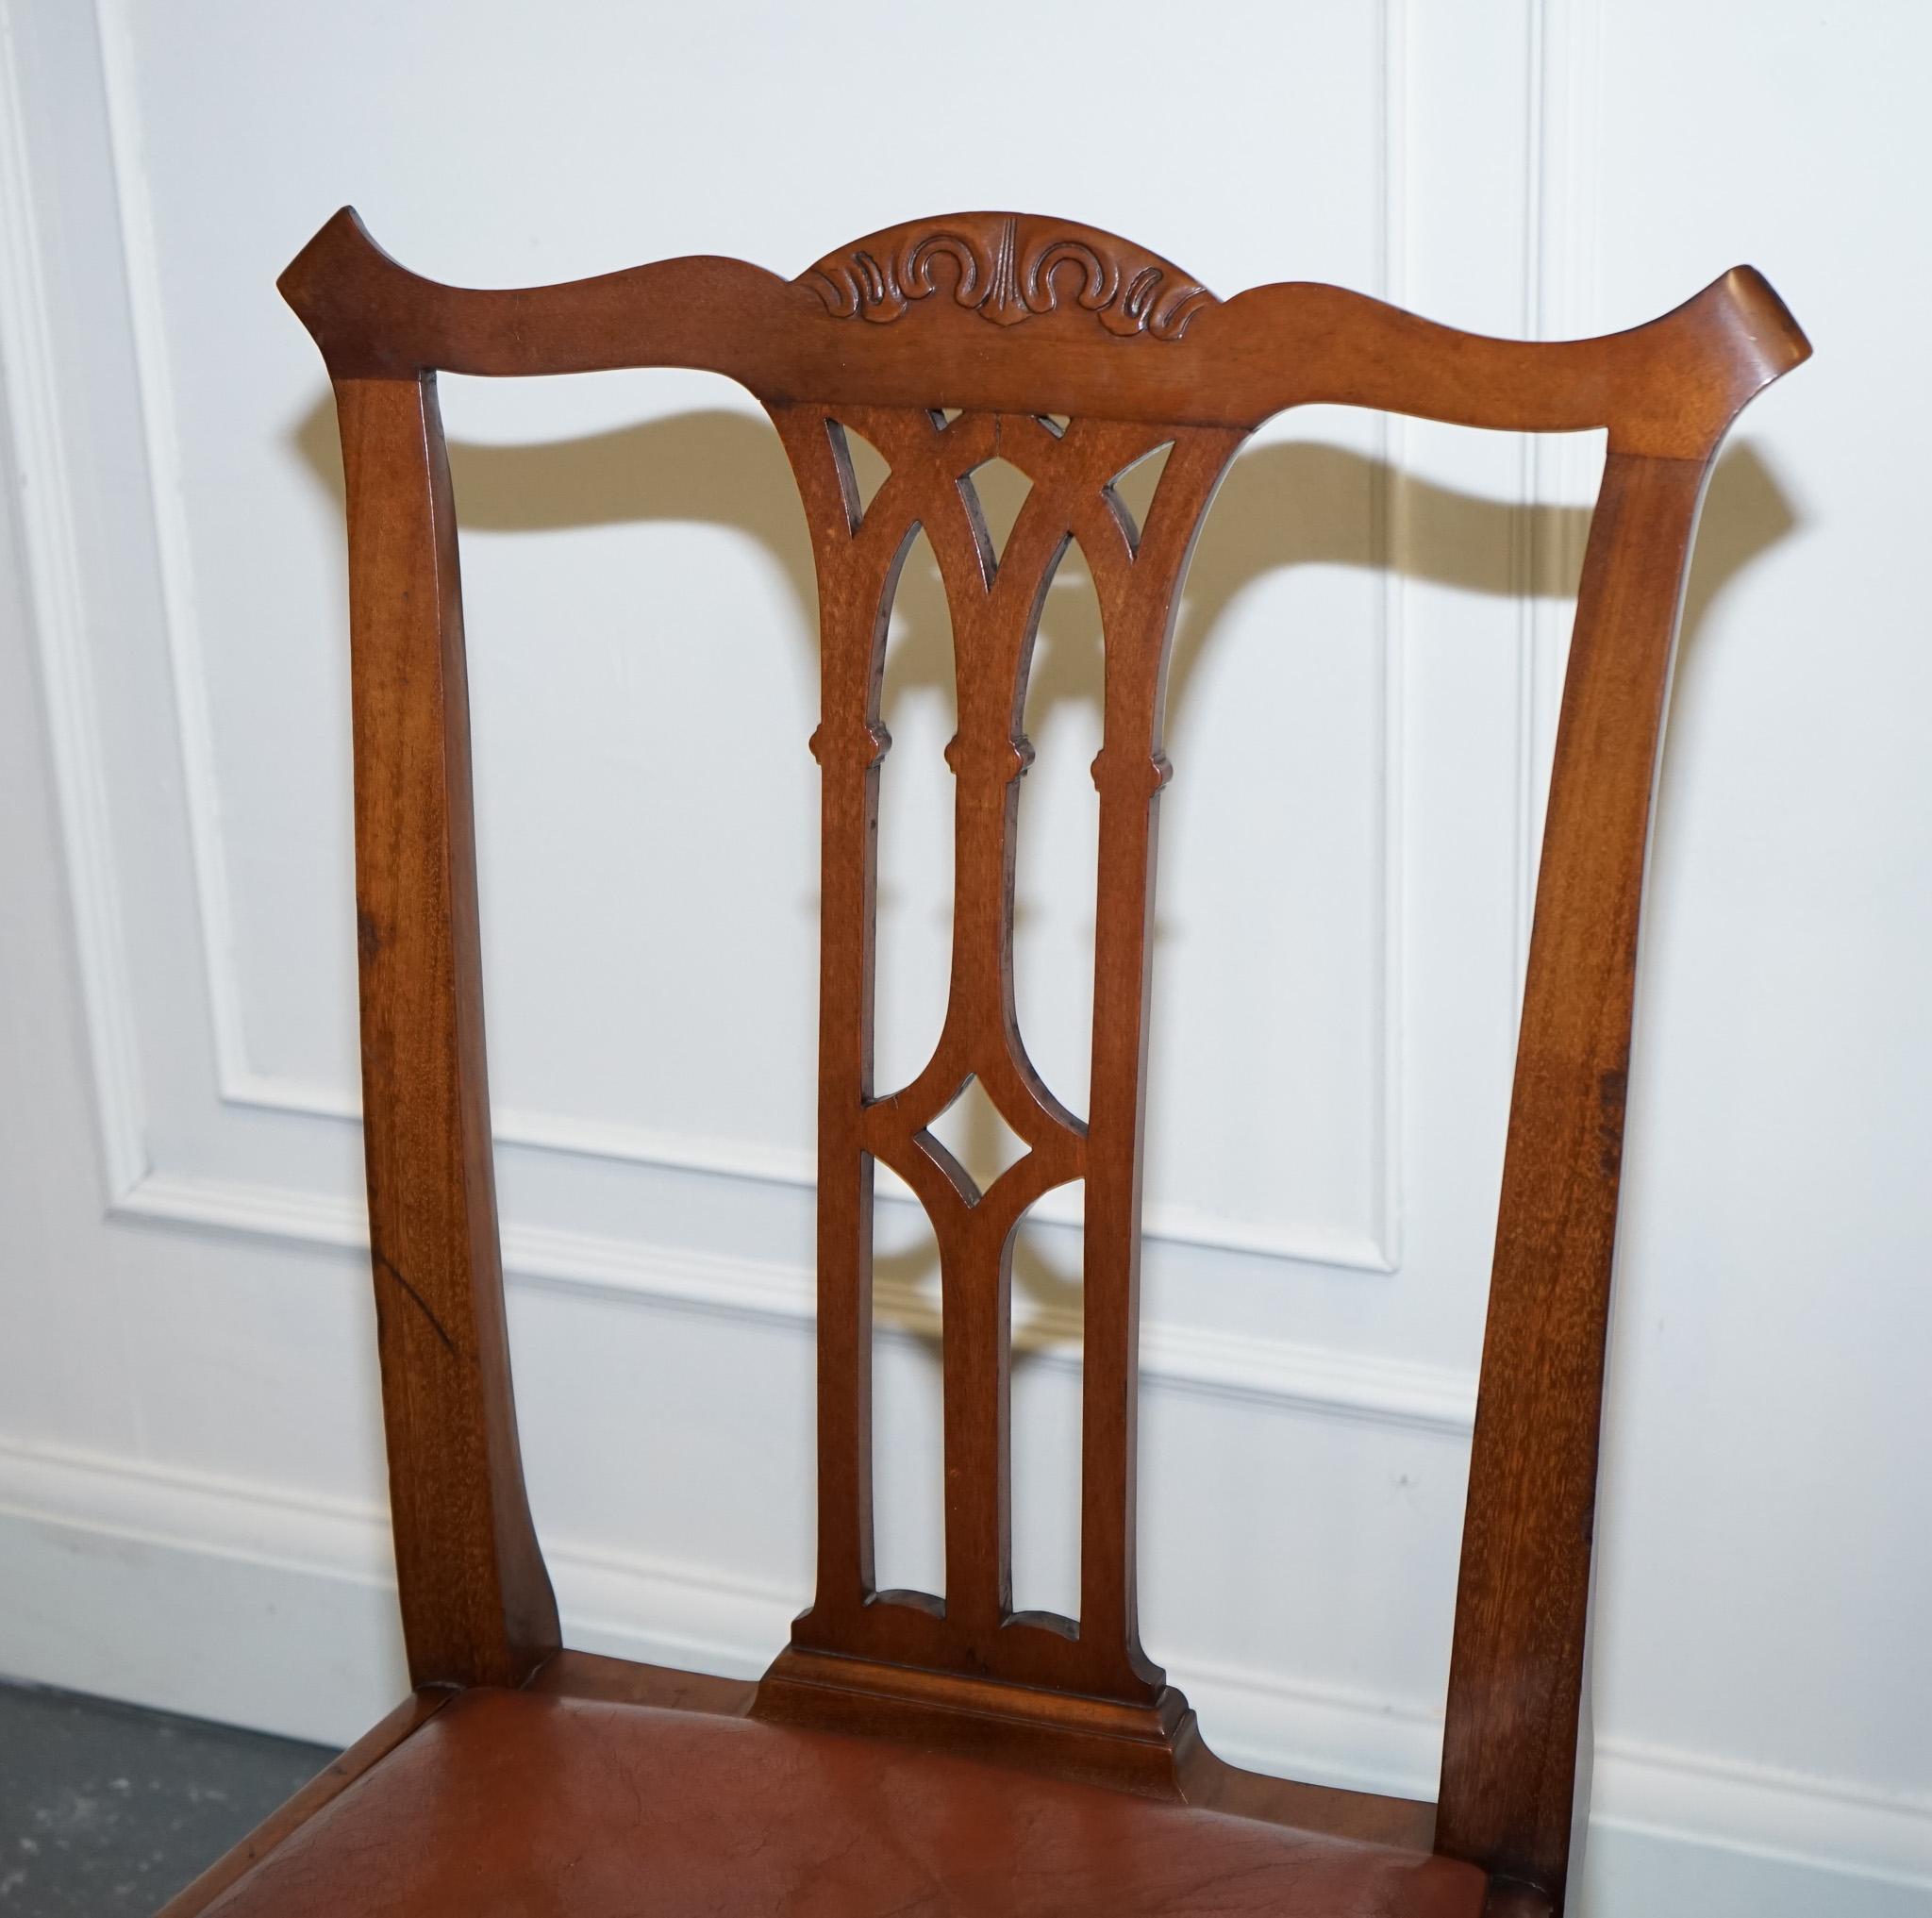 Hardwood CHIPPENDALE STYLE 5 DINING CHAIRS WiTH LEATHER SEATS PERFECT FOR ROUND TABLE For Sale